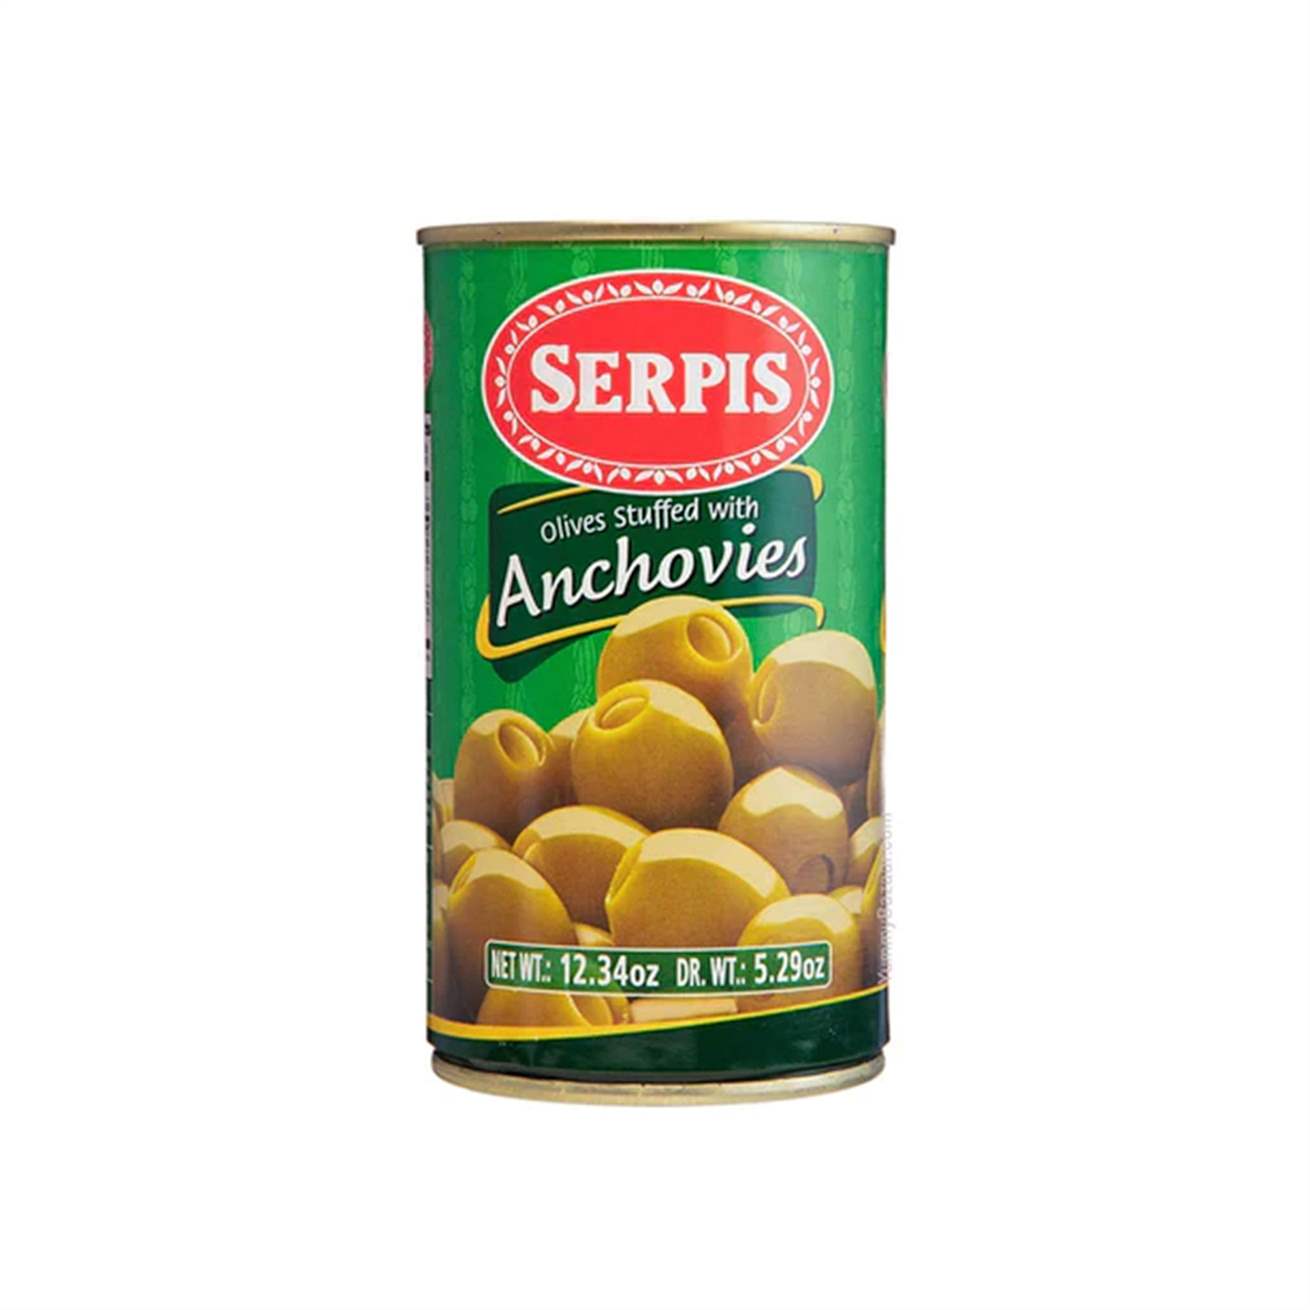 SERPIS GREEN OLIVES STUFFED WITH ANCHOVY 5.29oz